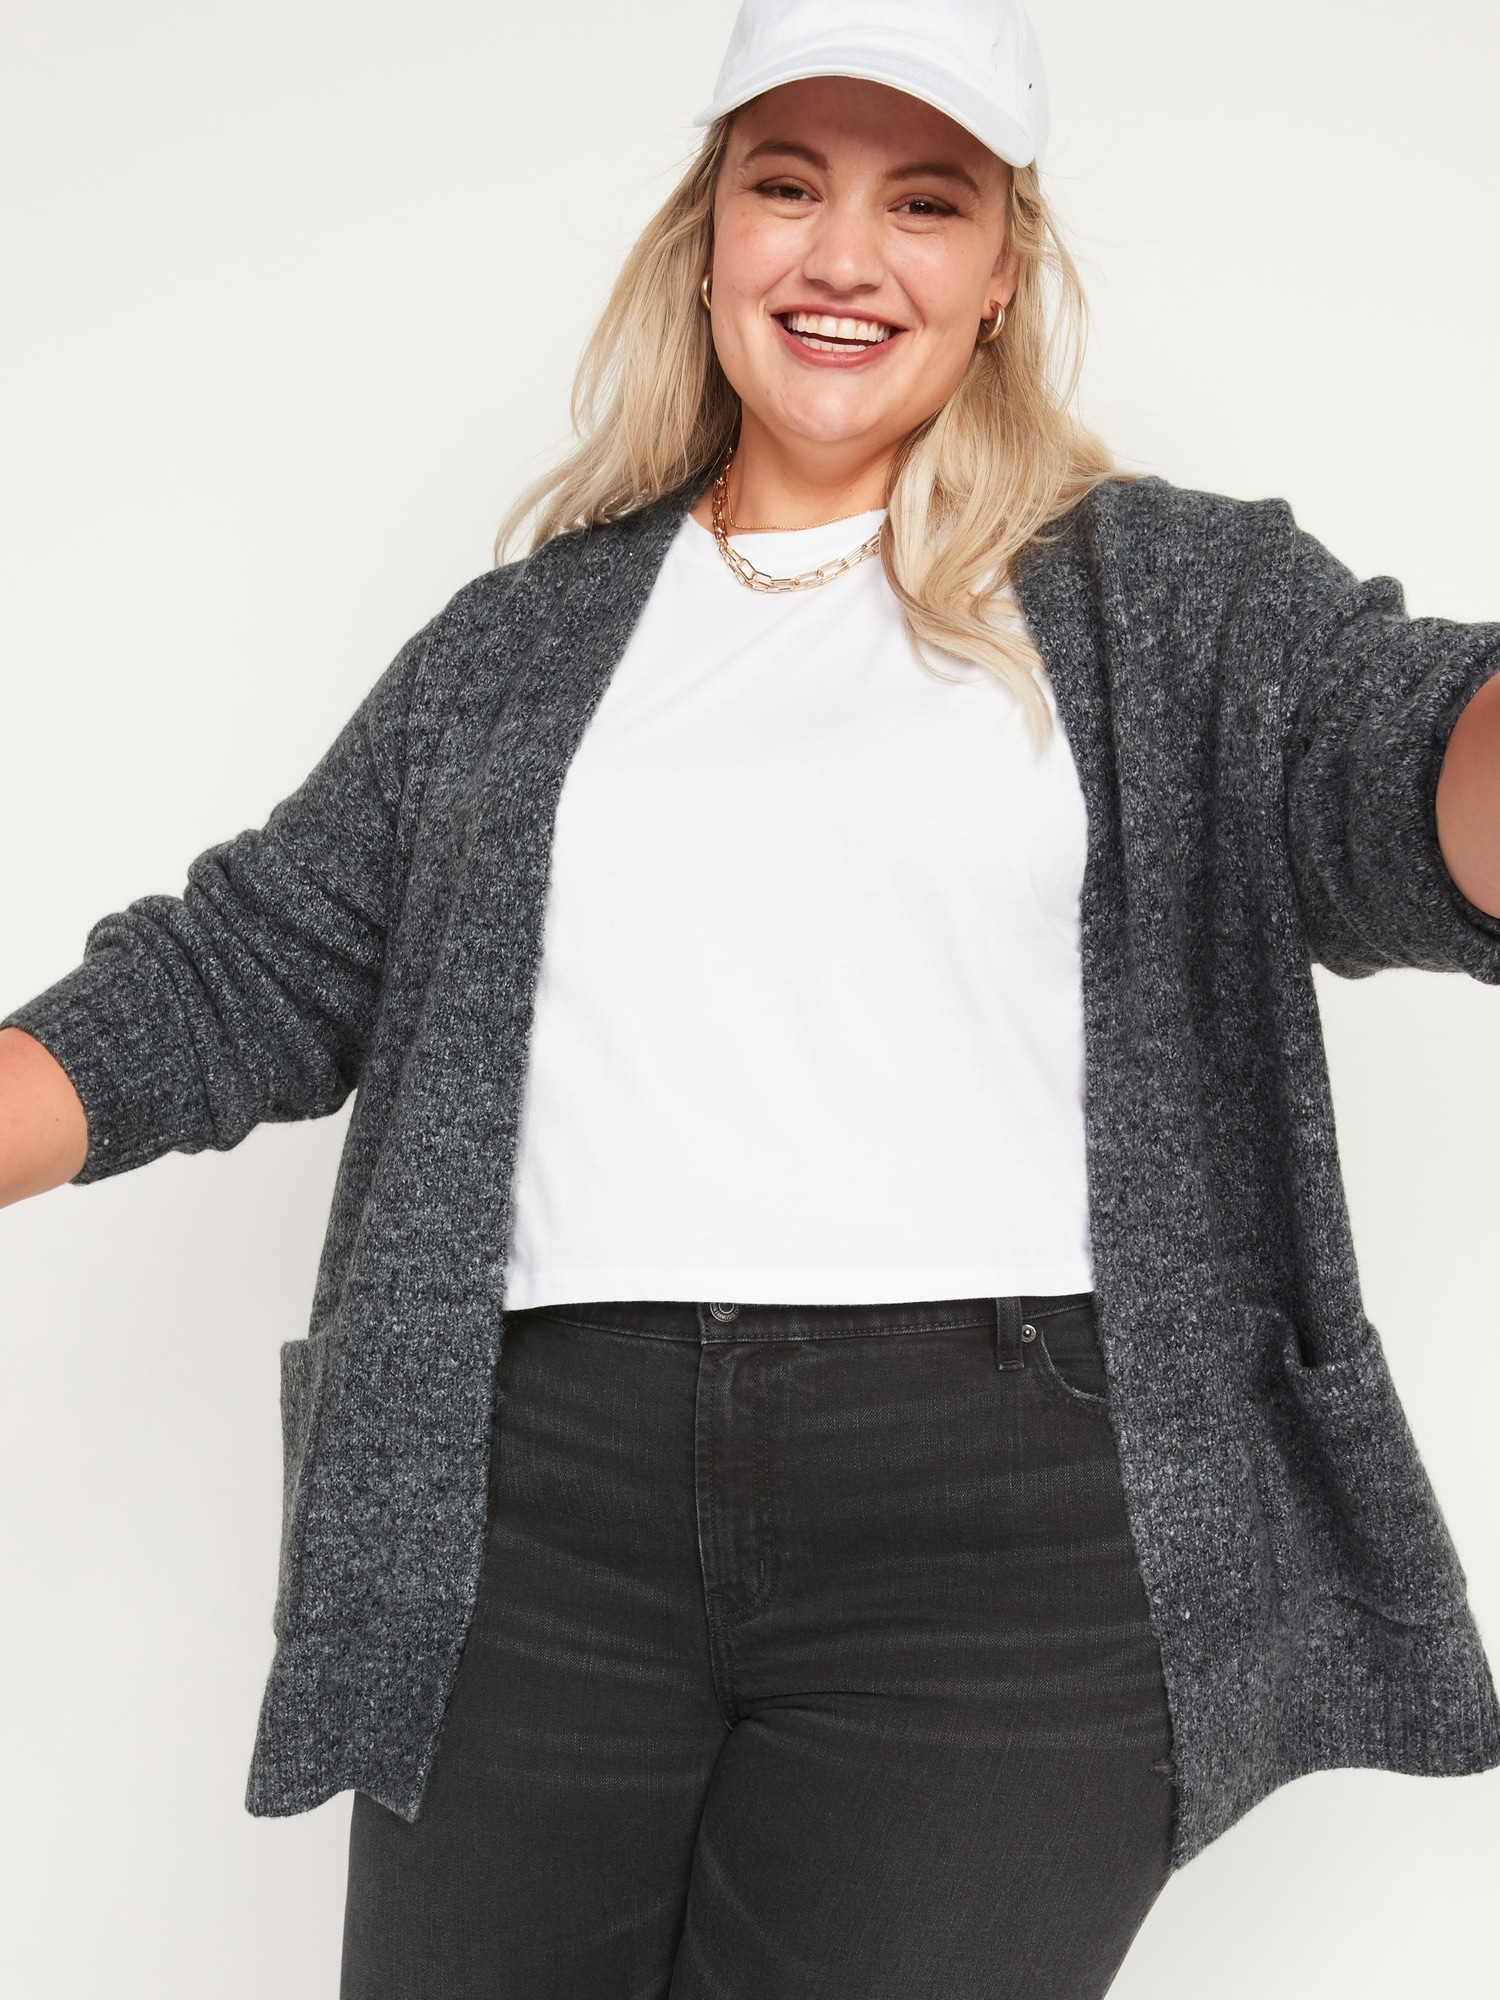 Cozy-Knit Open-Front Cardigan Sweater for Women | Old Navy